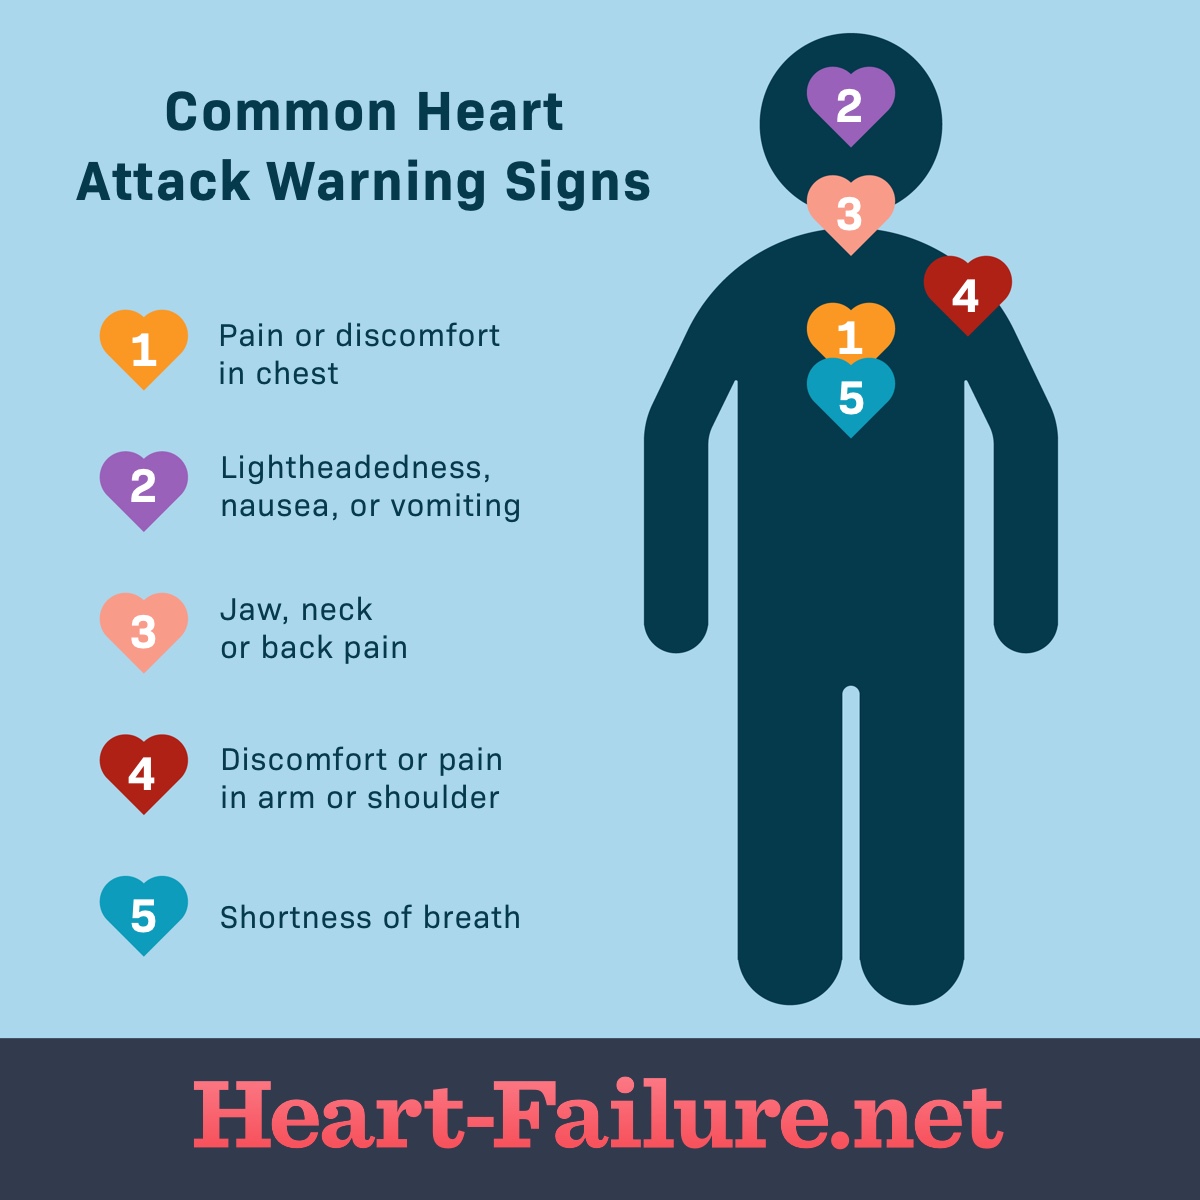 A silhouette labeled with common heart attack warning signs including pain or discomfort in the chest, shoulder, or chest